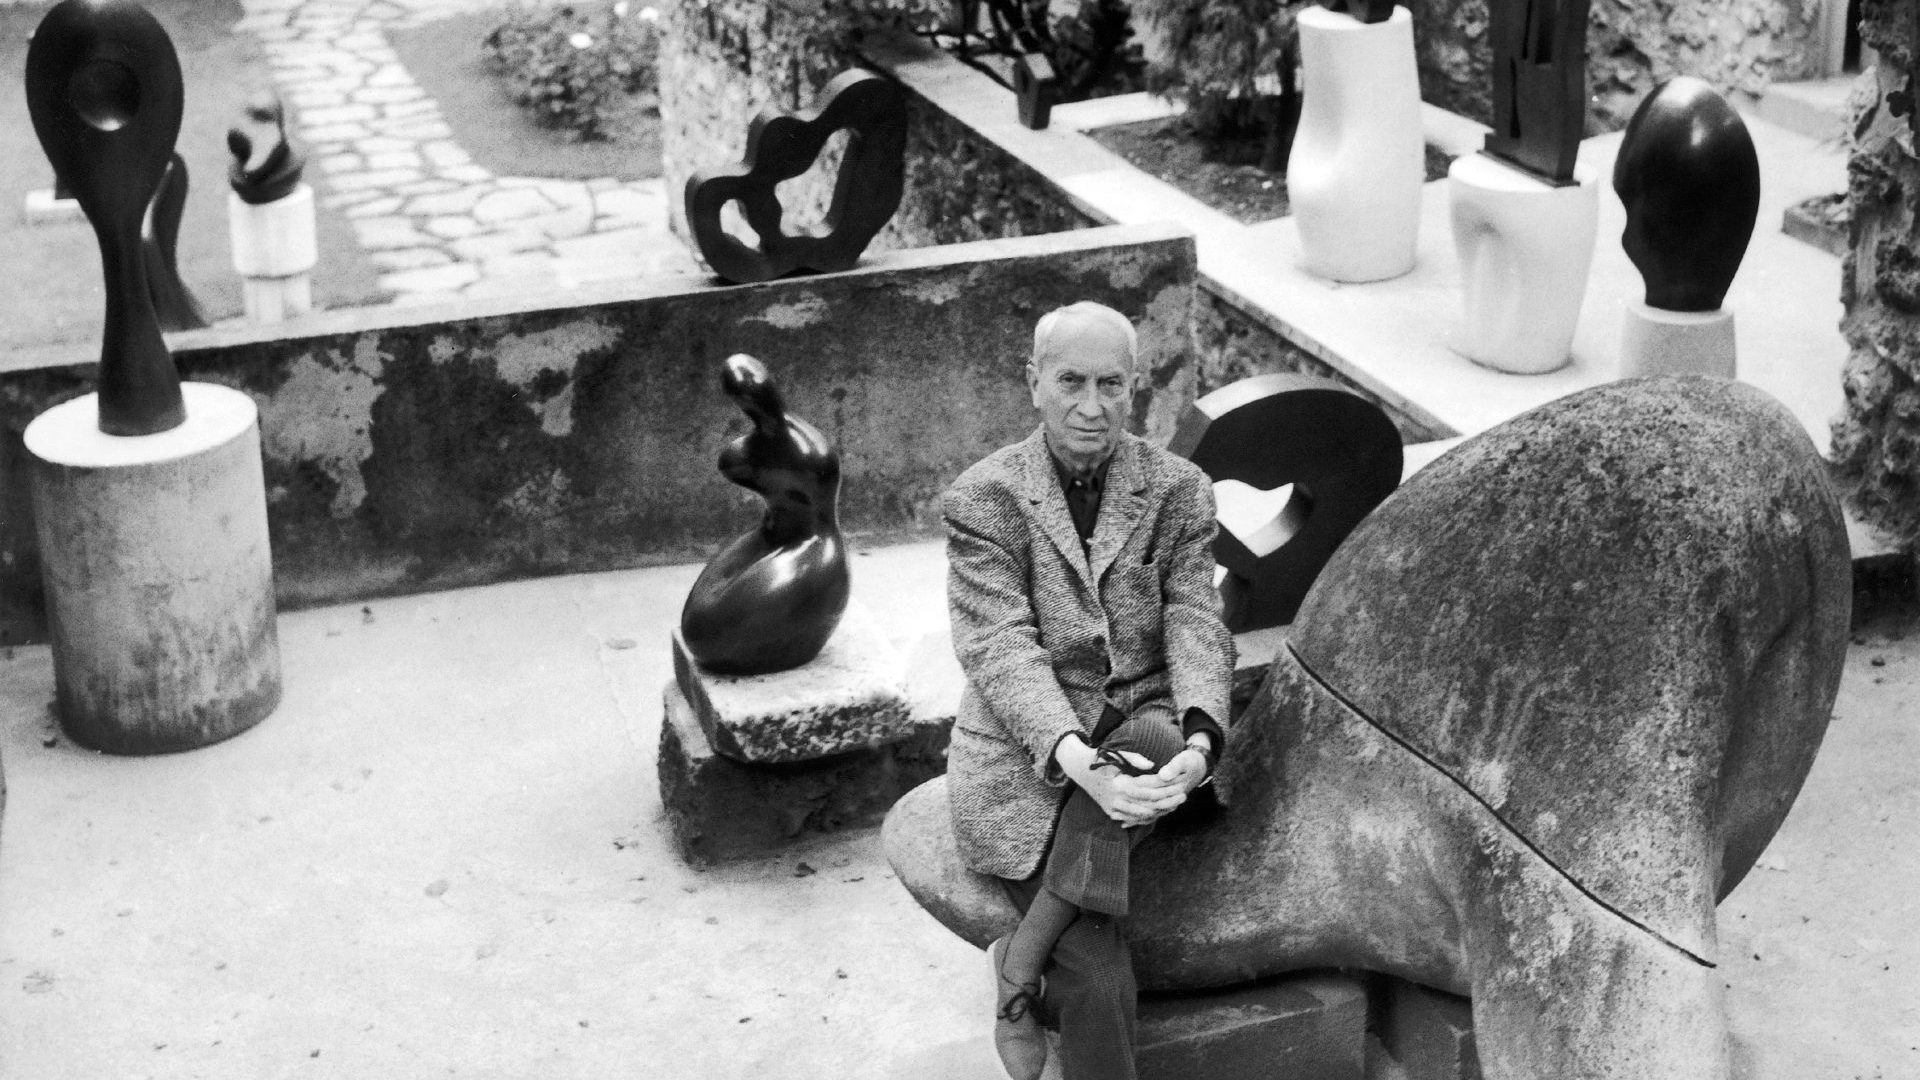 Jean Arp with some of his sculptures, circa 1960, in Clamart, France
(Photo: Keystone-France/Gamma-Rapho/Getty)